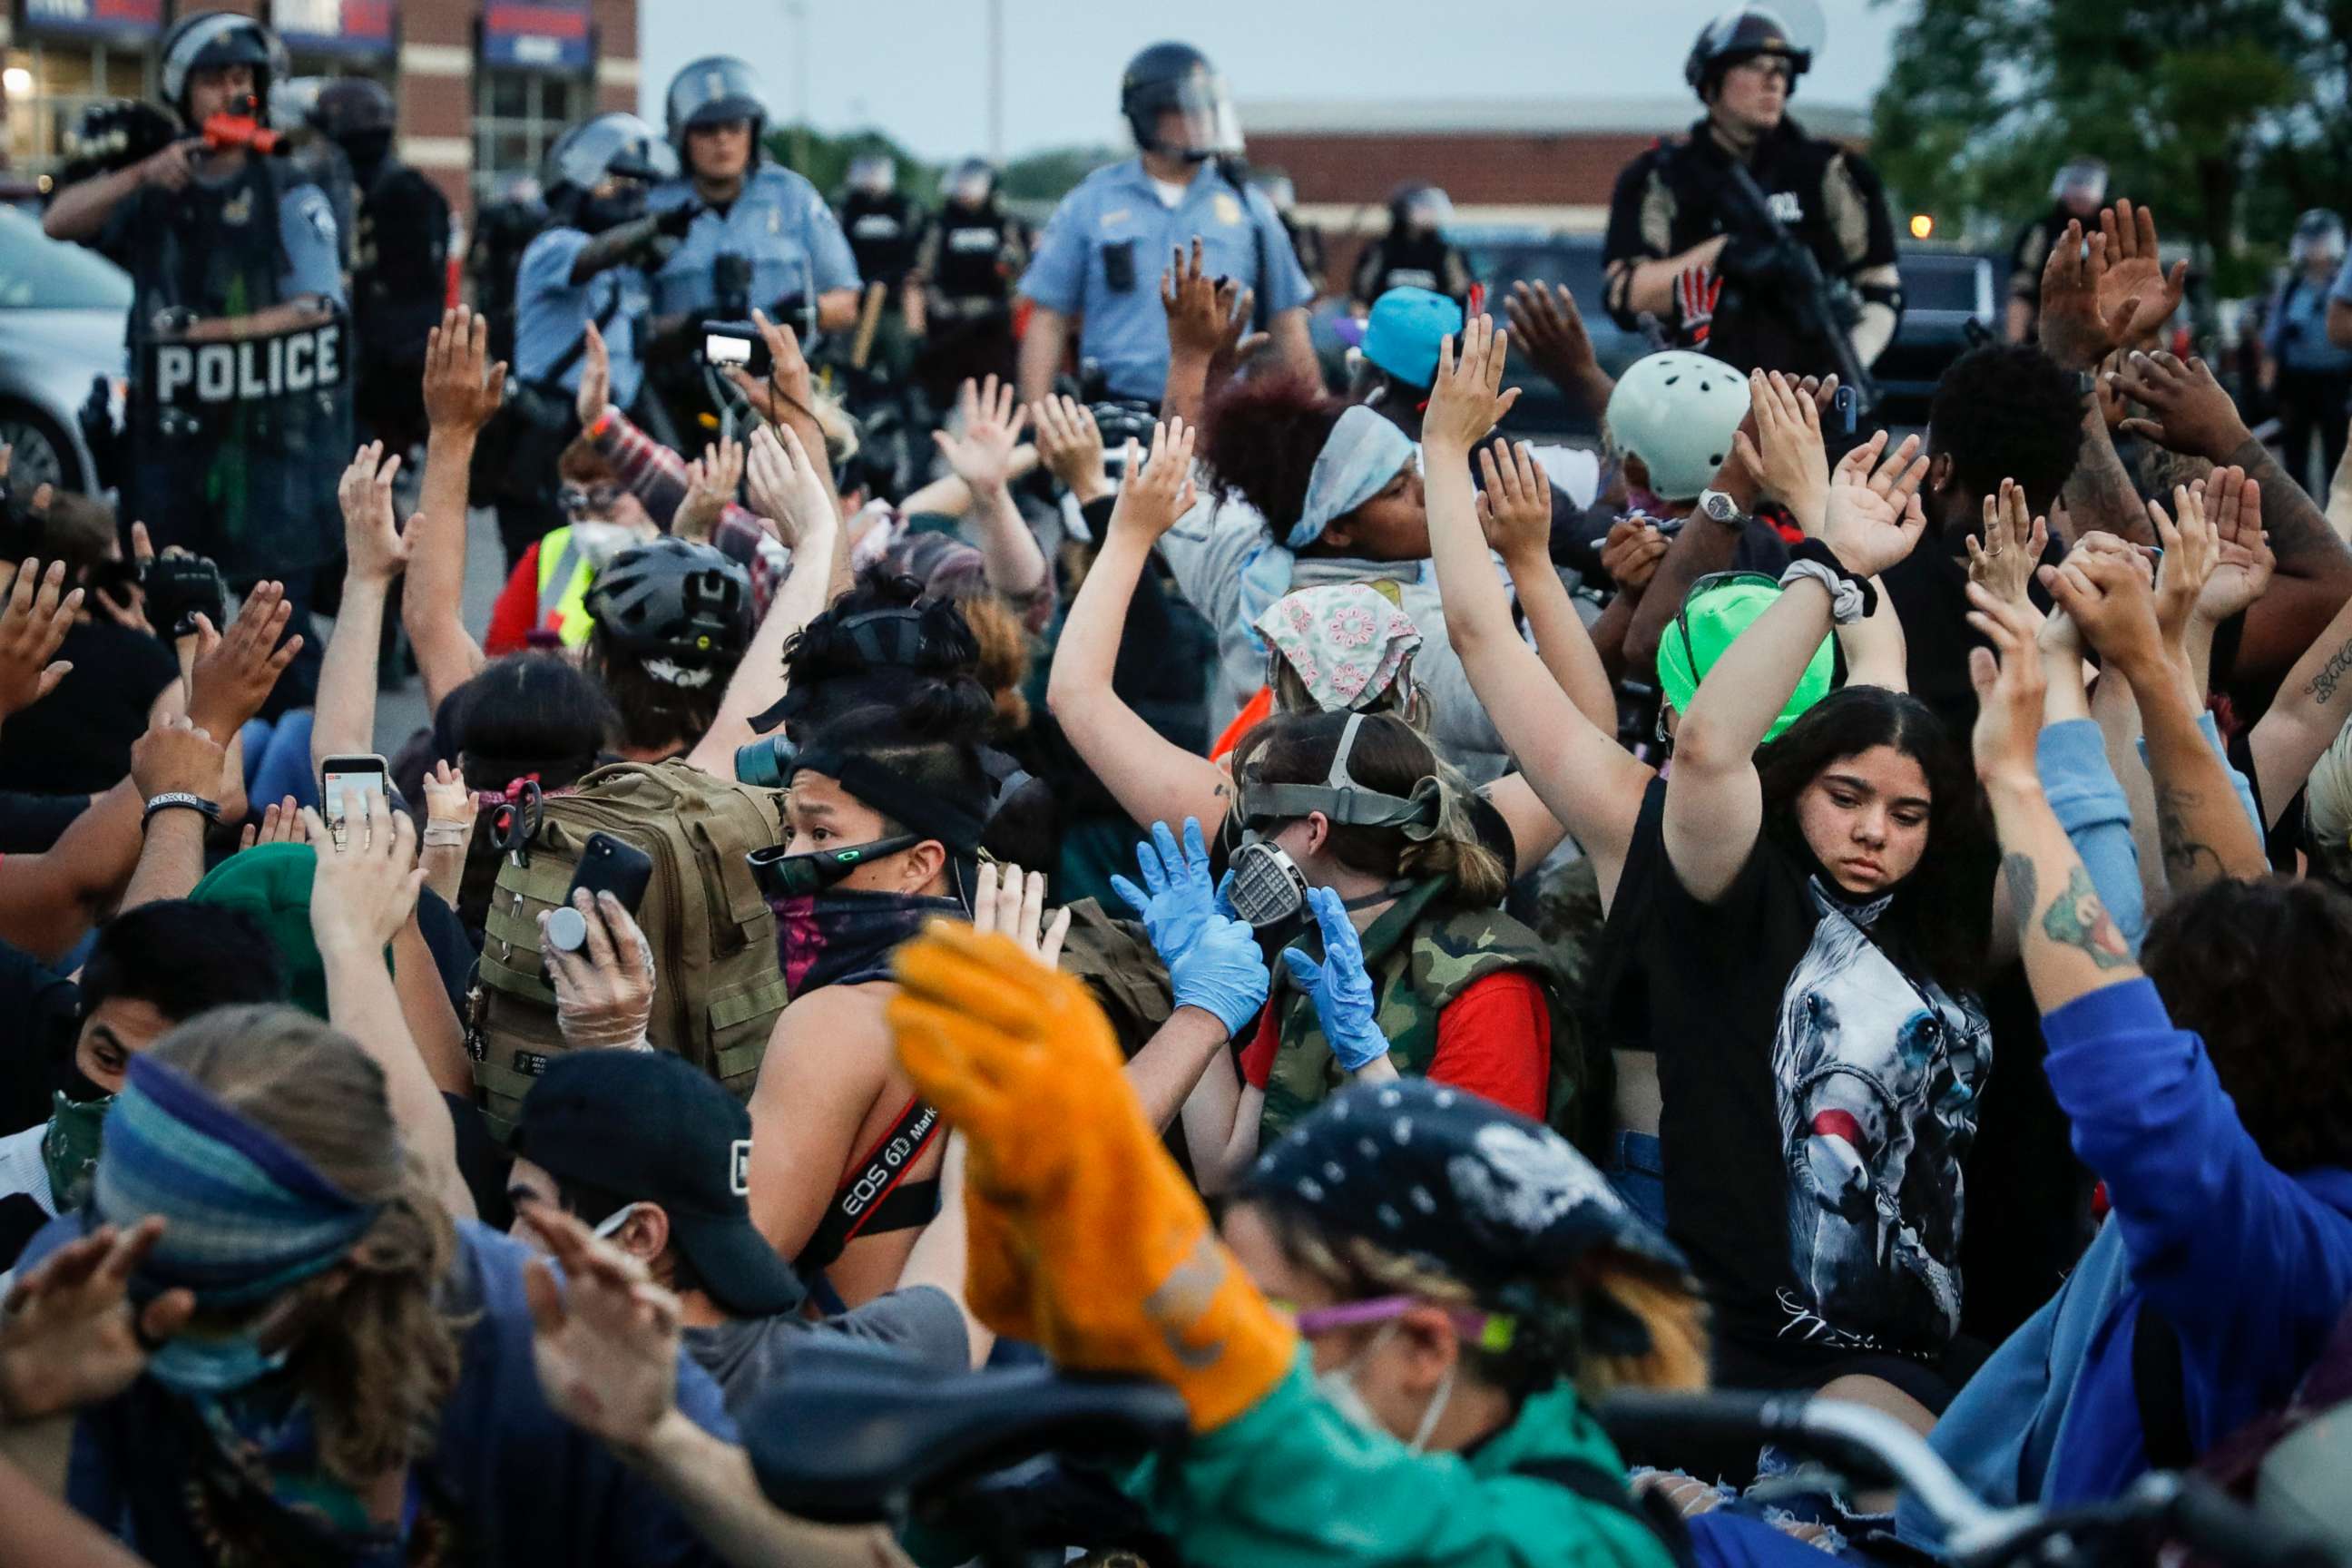 PHOTO: Protesters raise their hands on command from police as they are detained prior to arrest and processing at a gas station on South Washington Street, May 31, 2020, in Minneapolis.